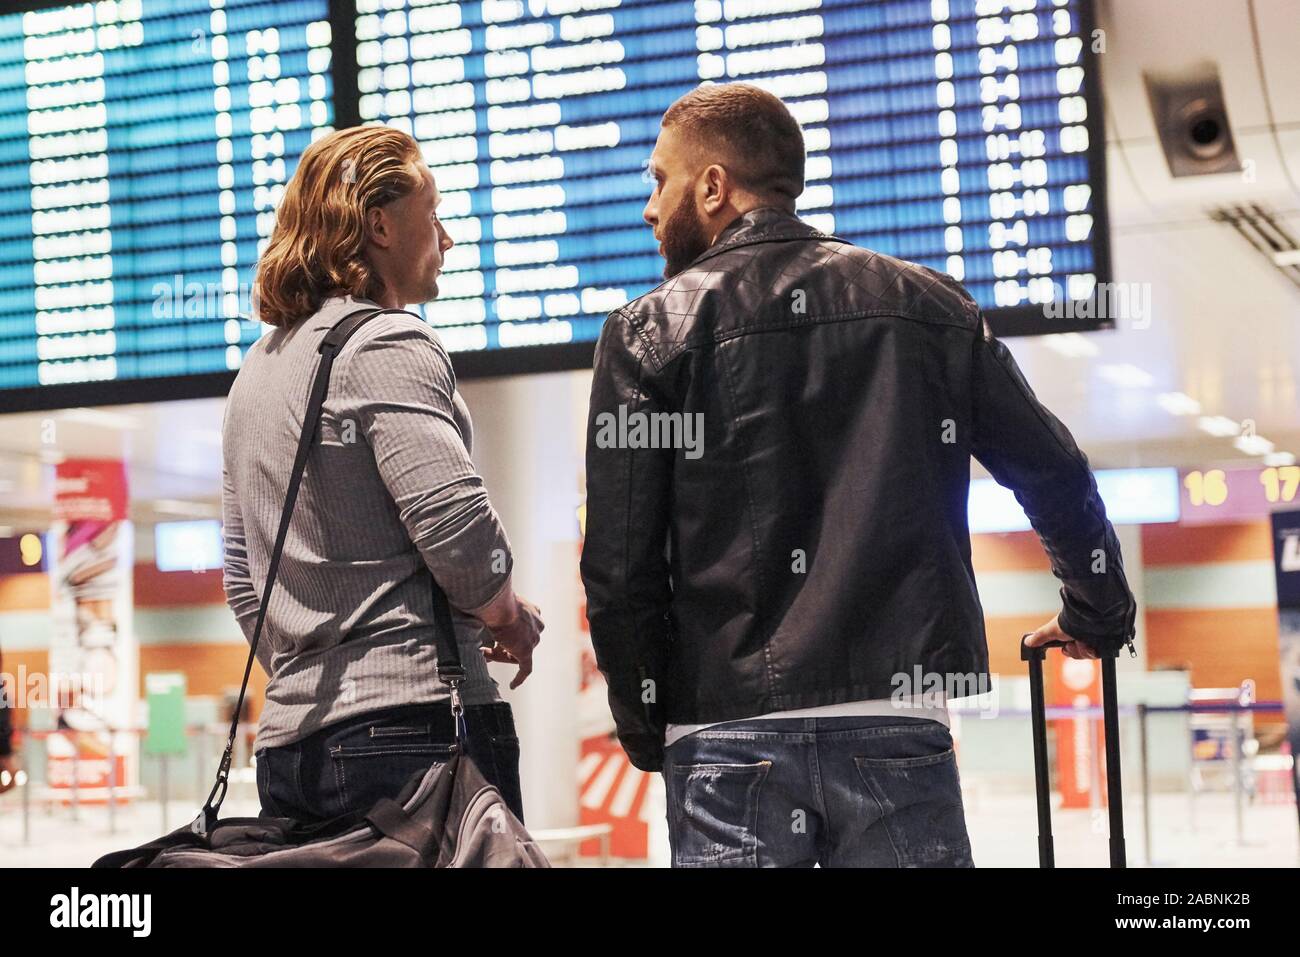 Photo of two comrades situating in airport near flight information display system Stock Photo